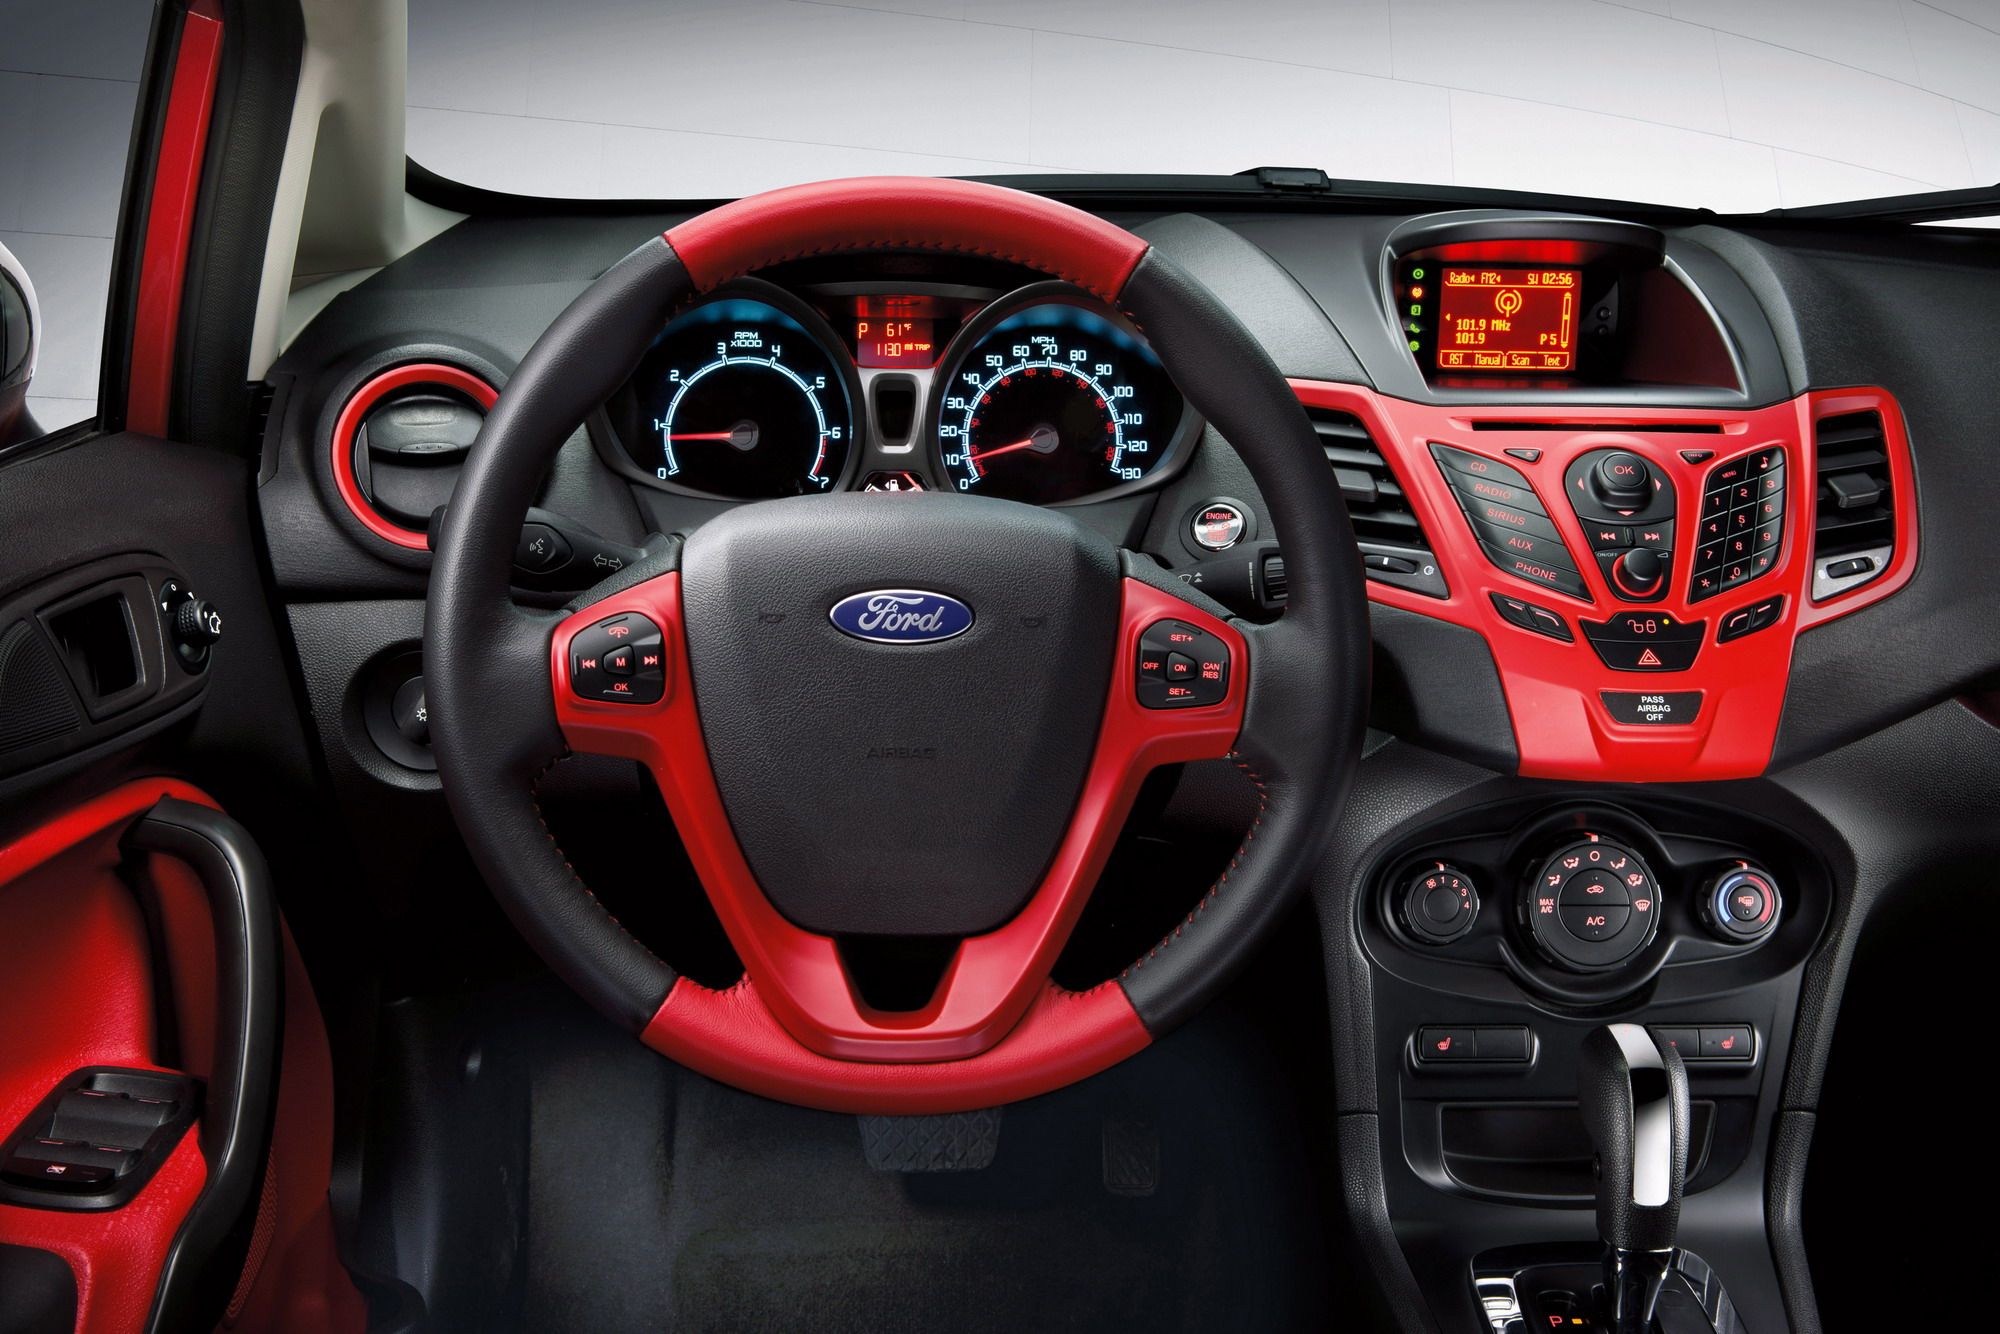 2012 Ford Fiesta Personalization Packages